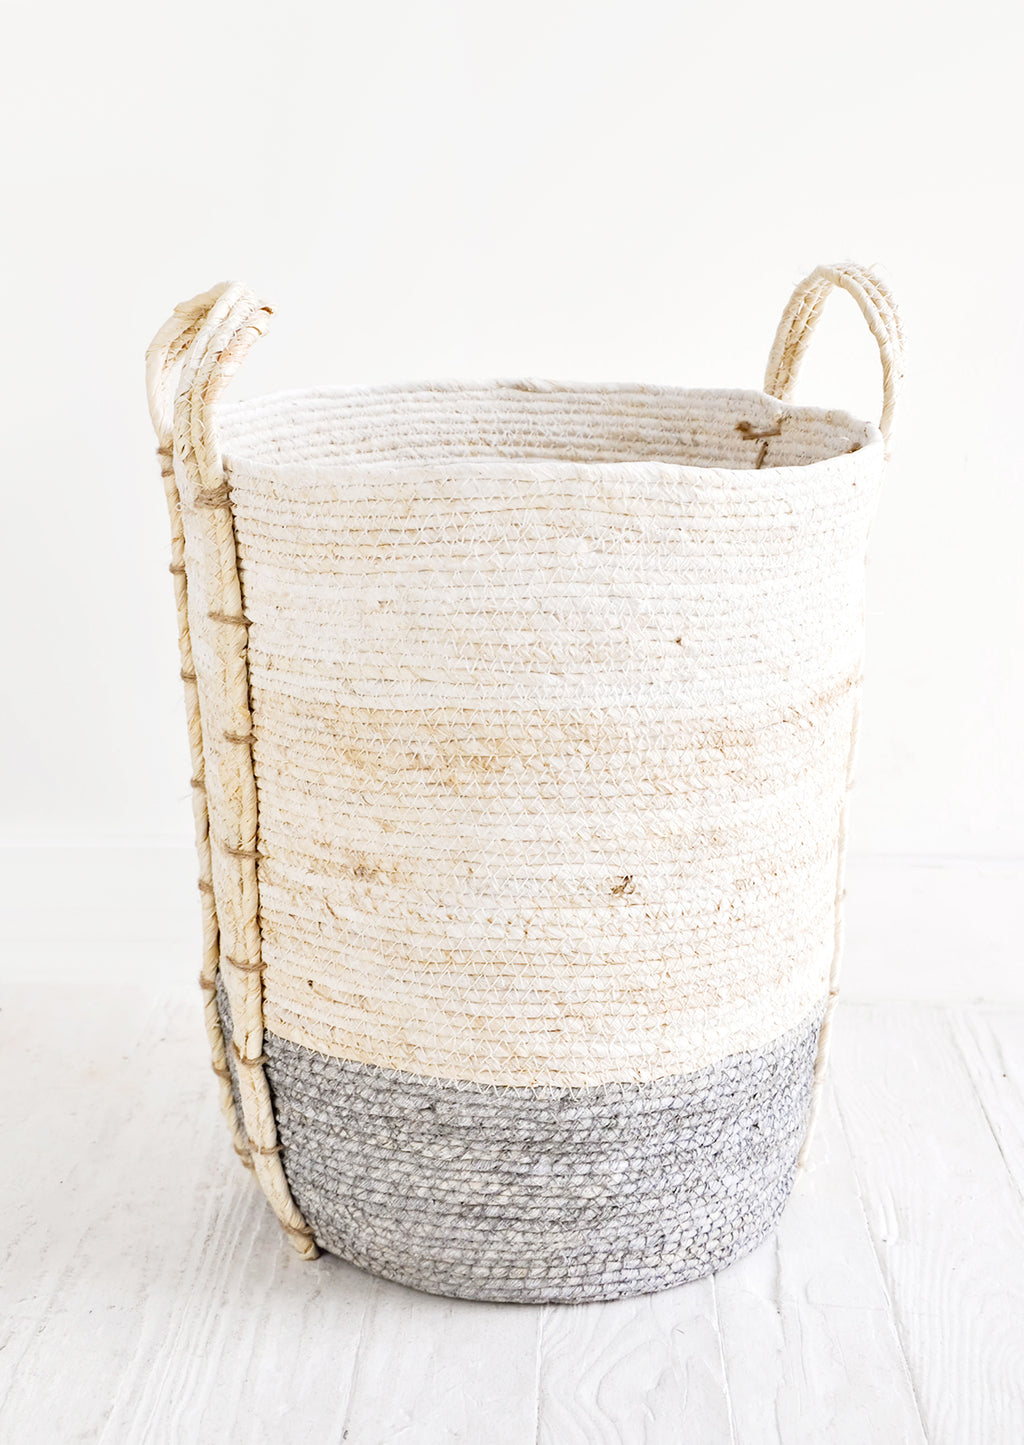 Slate / Tall [Large]: Round, tall storage basket made from natural maize fiber, fiber handles attached at sides, band of contrasting grey color along bottom.